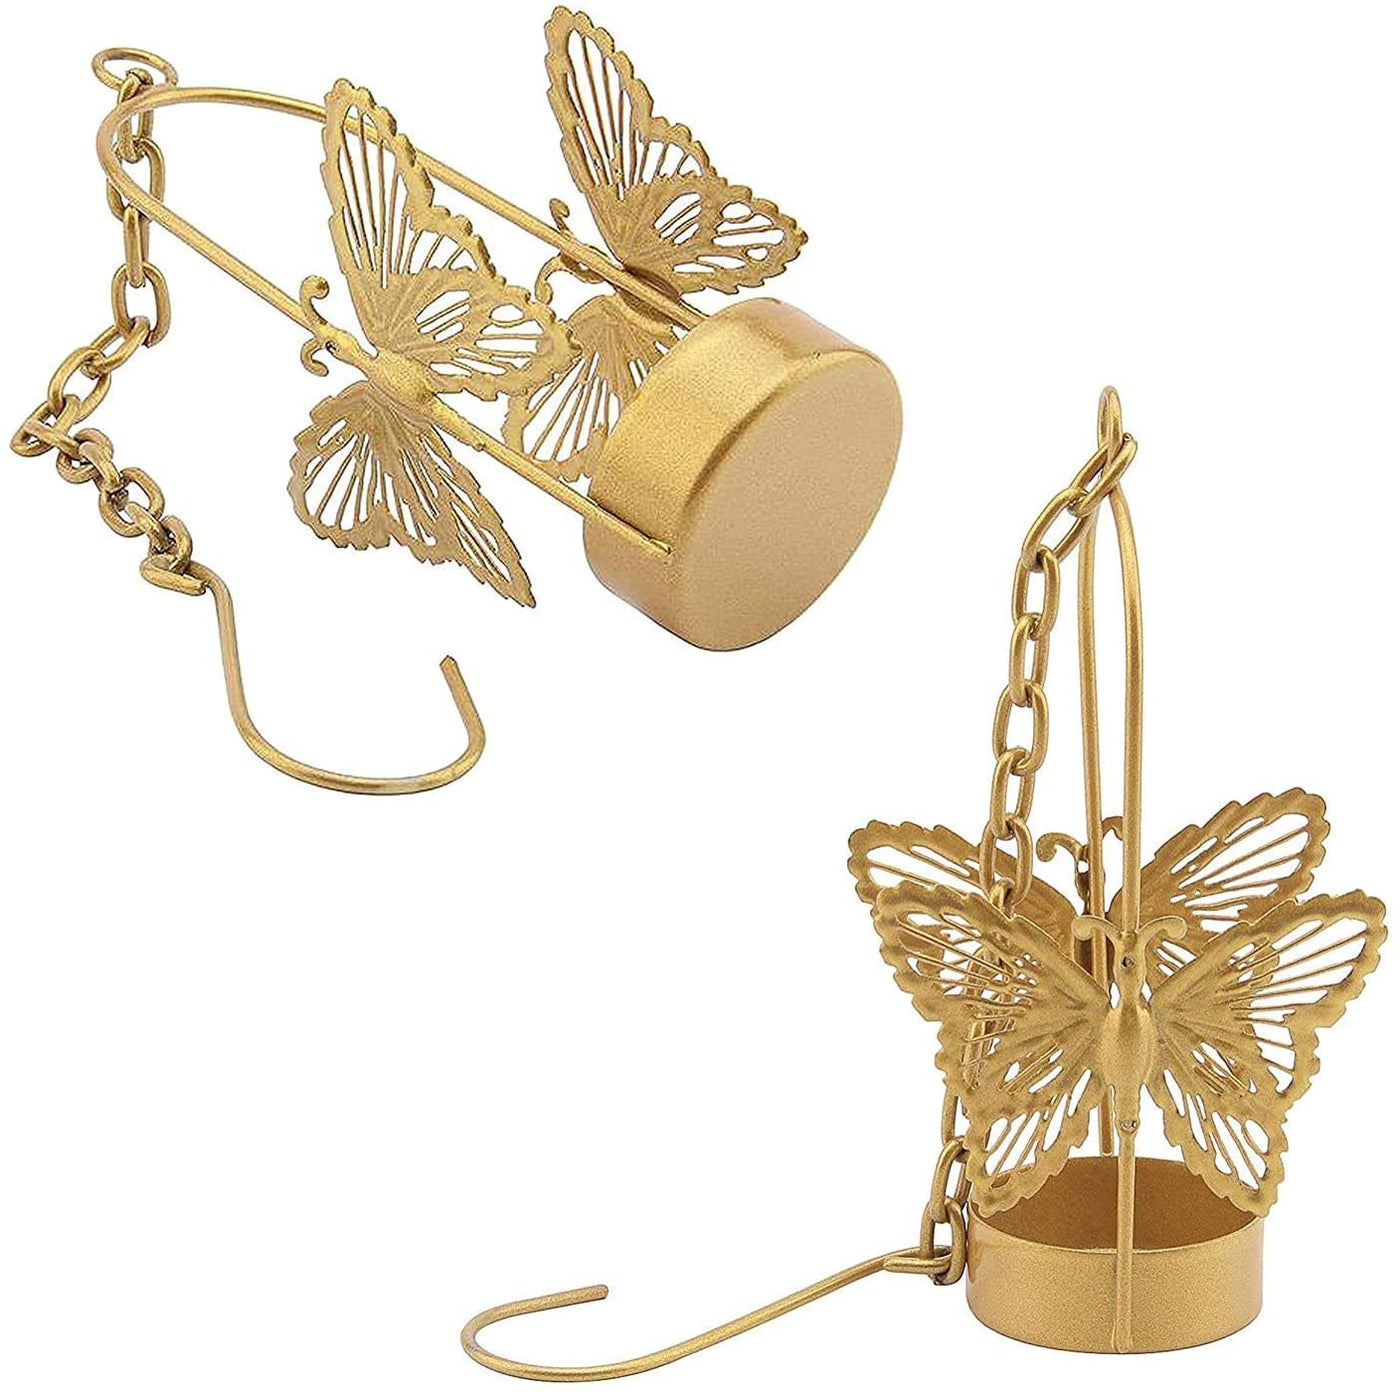 LAMANSH Gold / Metal / 10 LAMANSH® ( Pack of 10 ) Festive Decorative Hanging Butterfly Tealight Candle Holder for Home Decor with Chain Hangs for Diwali, Christmas Home and Party Decorations